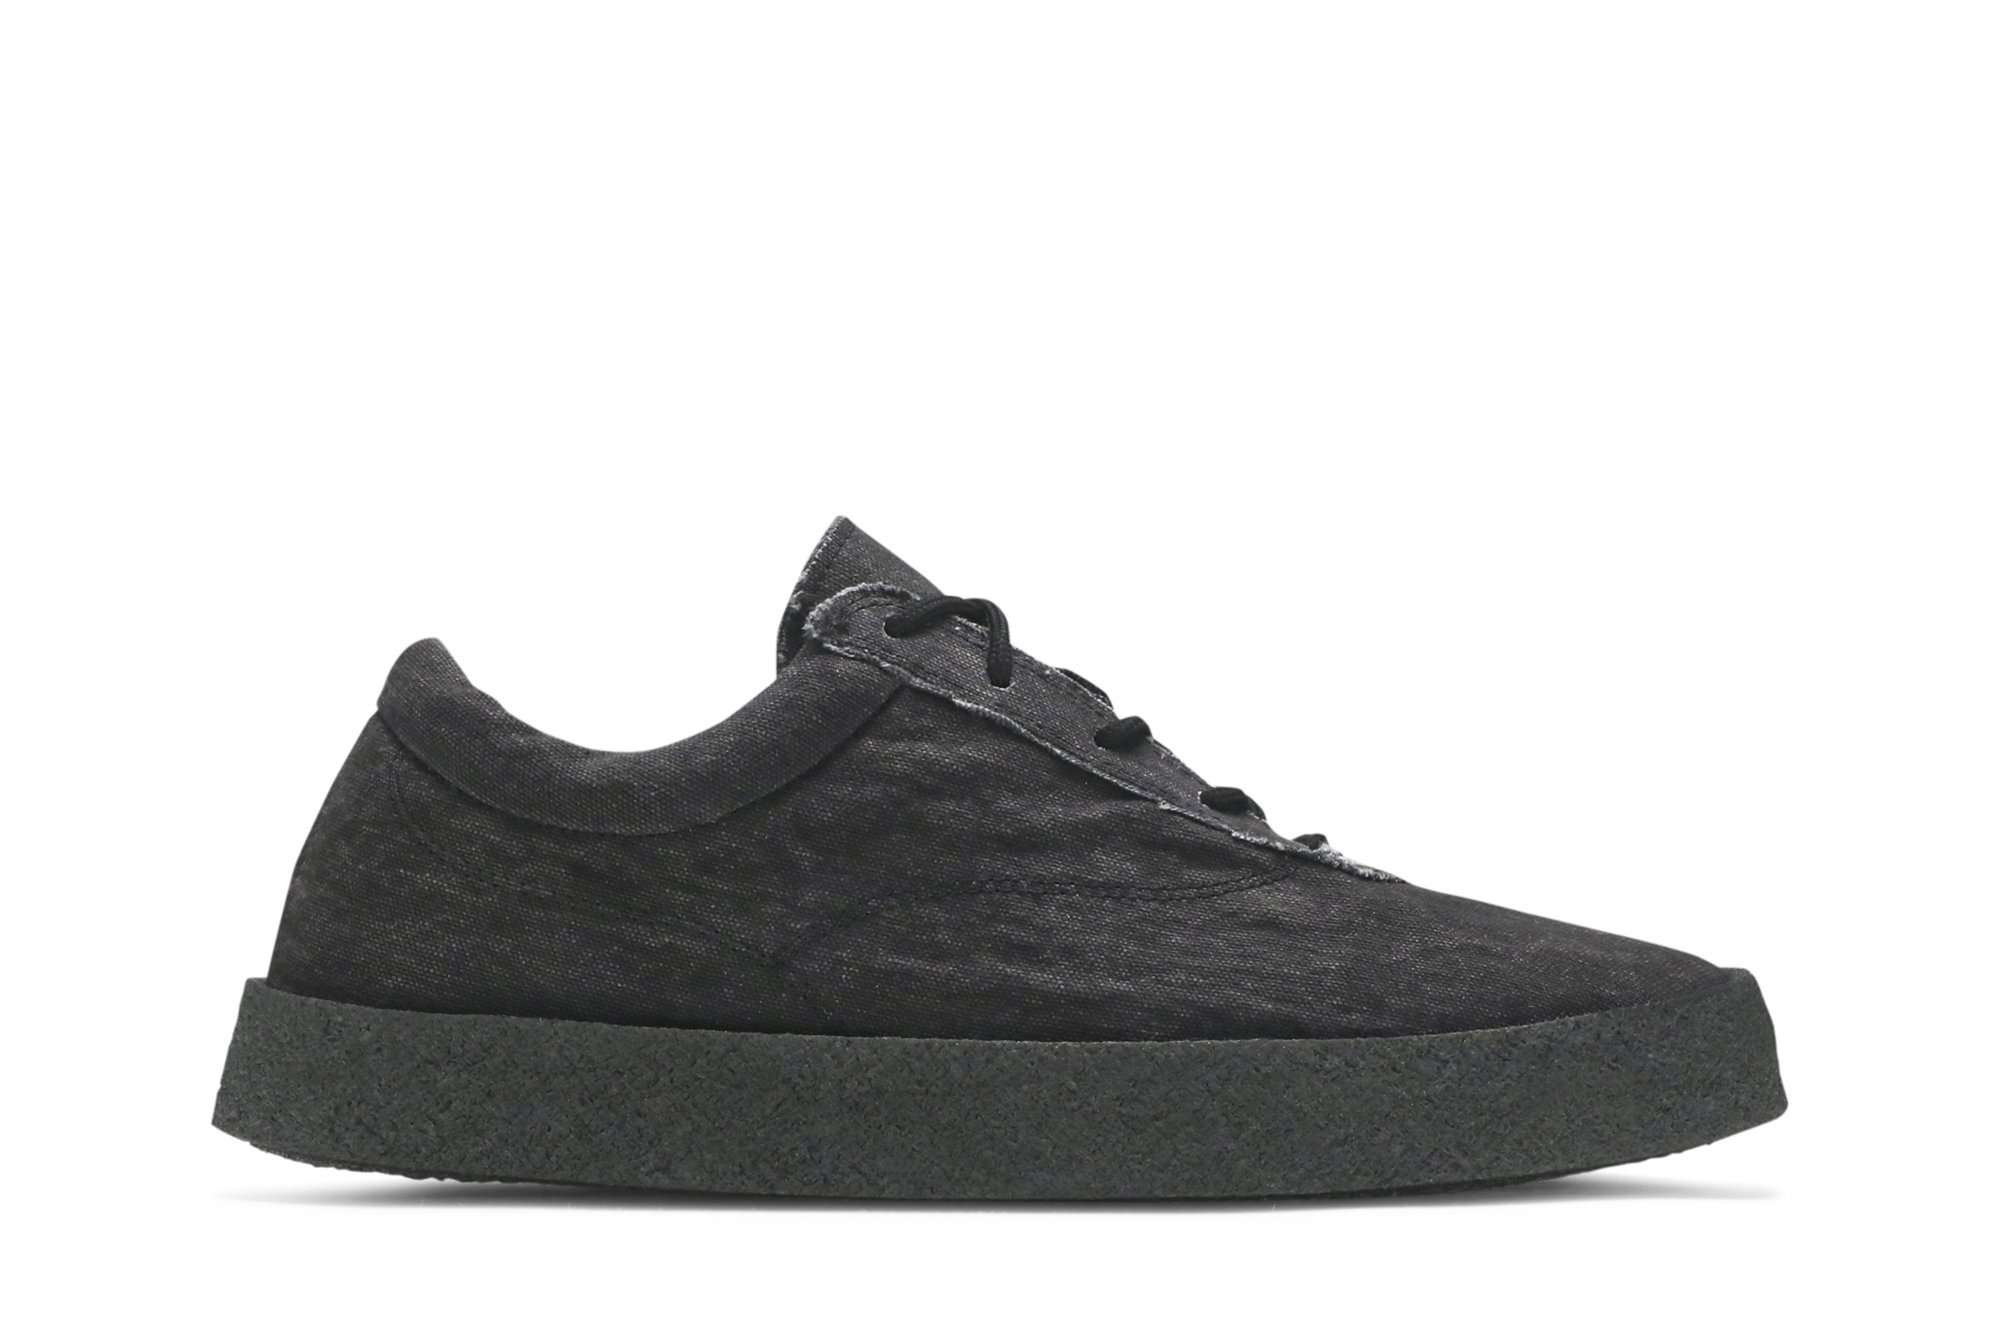 Yeezy Season 6 Washed Canvas Crepe Sneaker 'Graphite'